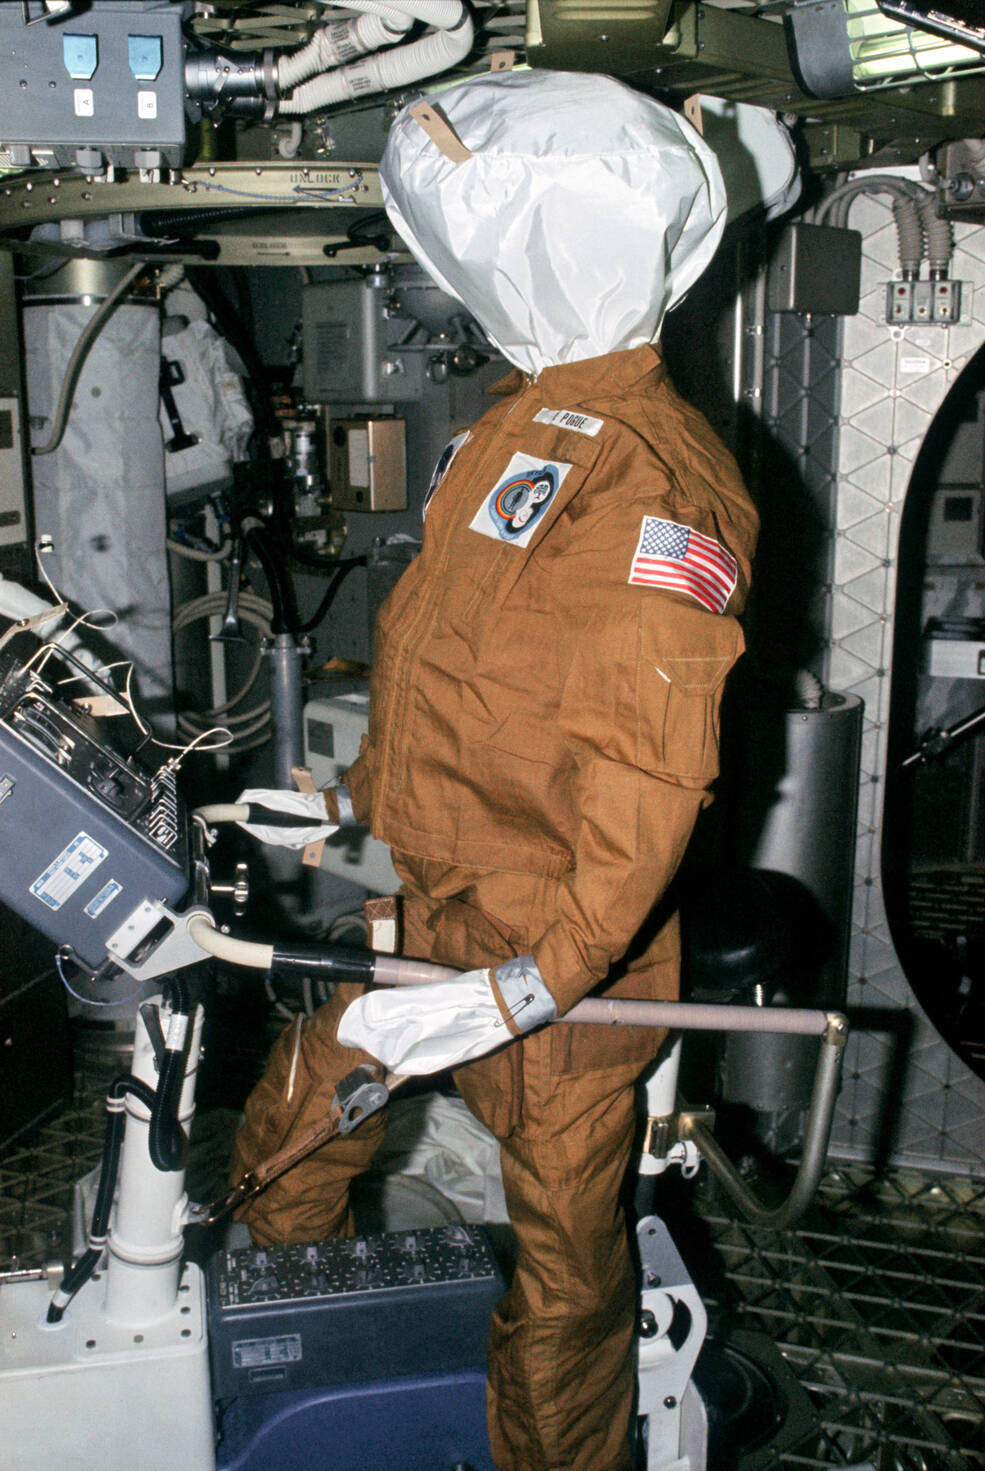 The Skylab 3 astronauts stuffed the Skylab 4 astronauts’ flight suits with clothes and posed them around the station for them to find when they arrived at the station.